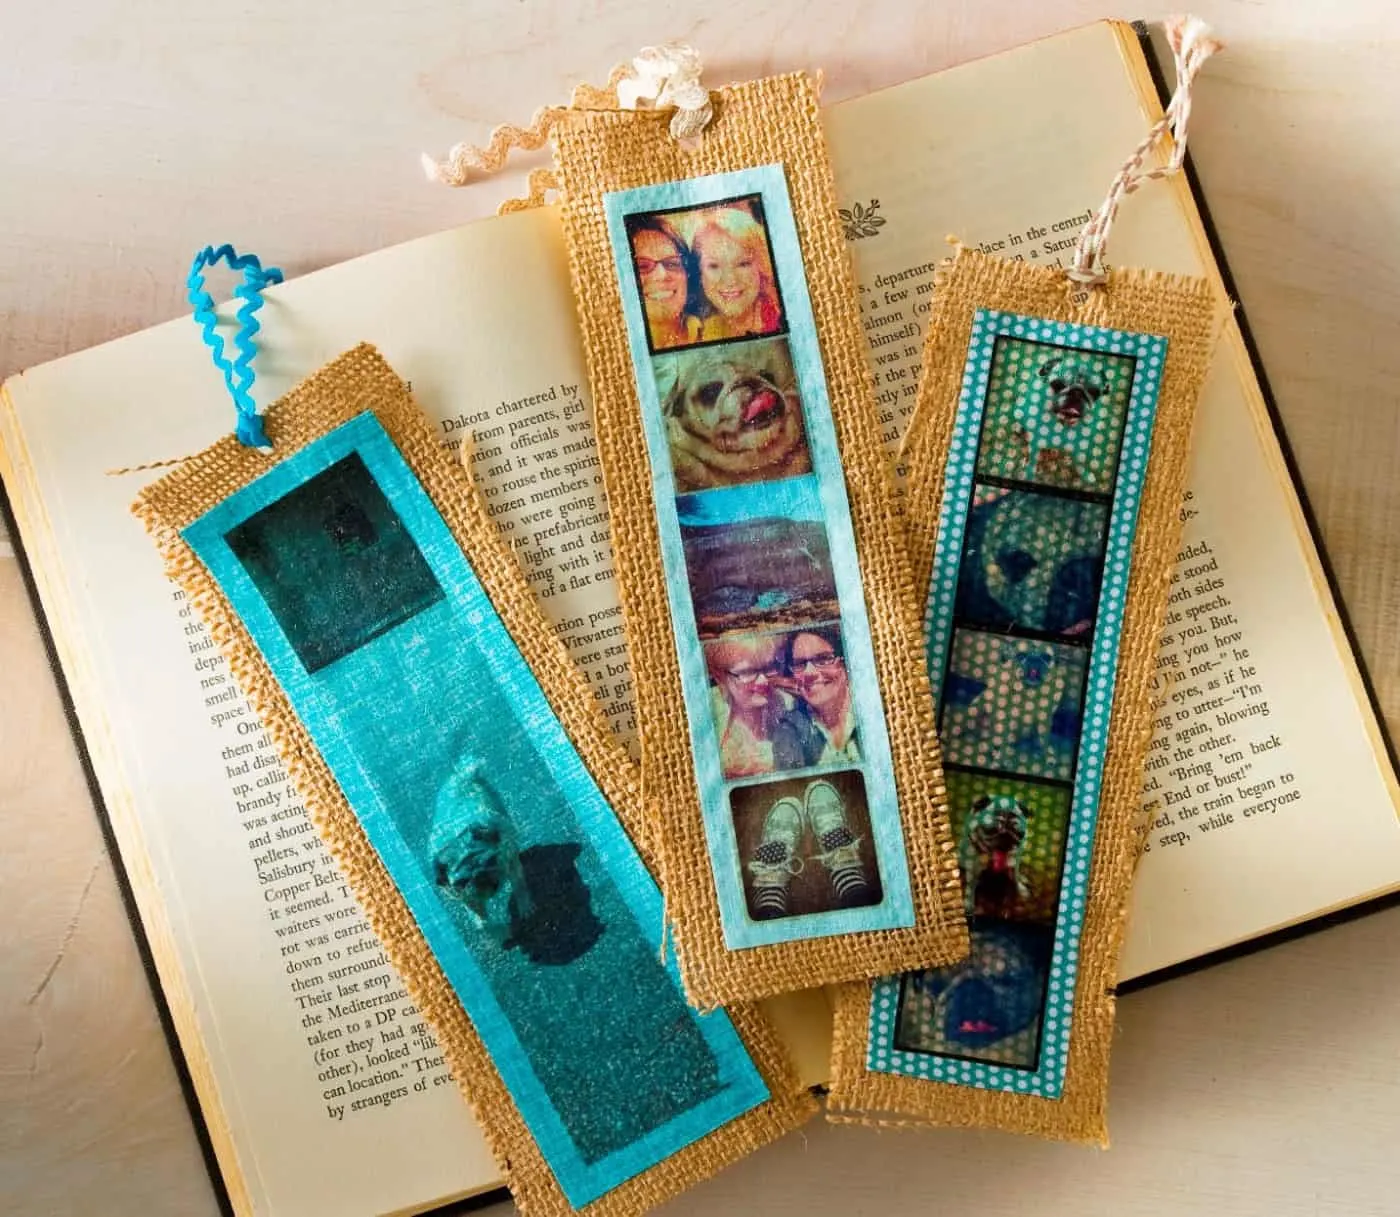 Make some personalized DIY bookmarks using your favorite Instagram photos! These are the perfect gift idea - and so easy to do. 